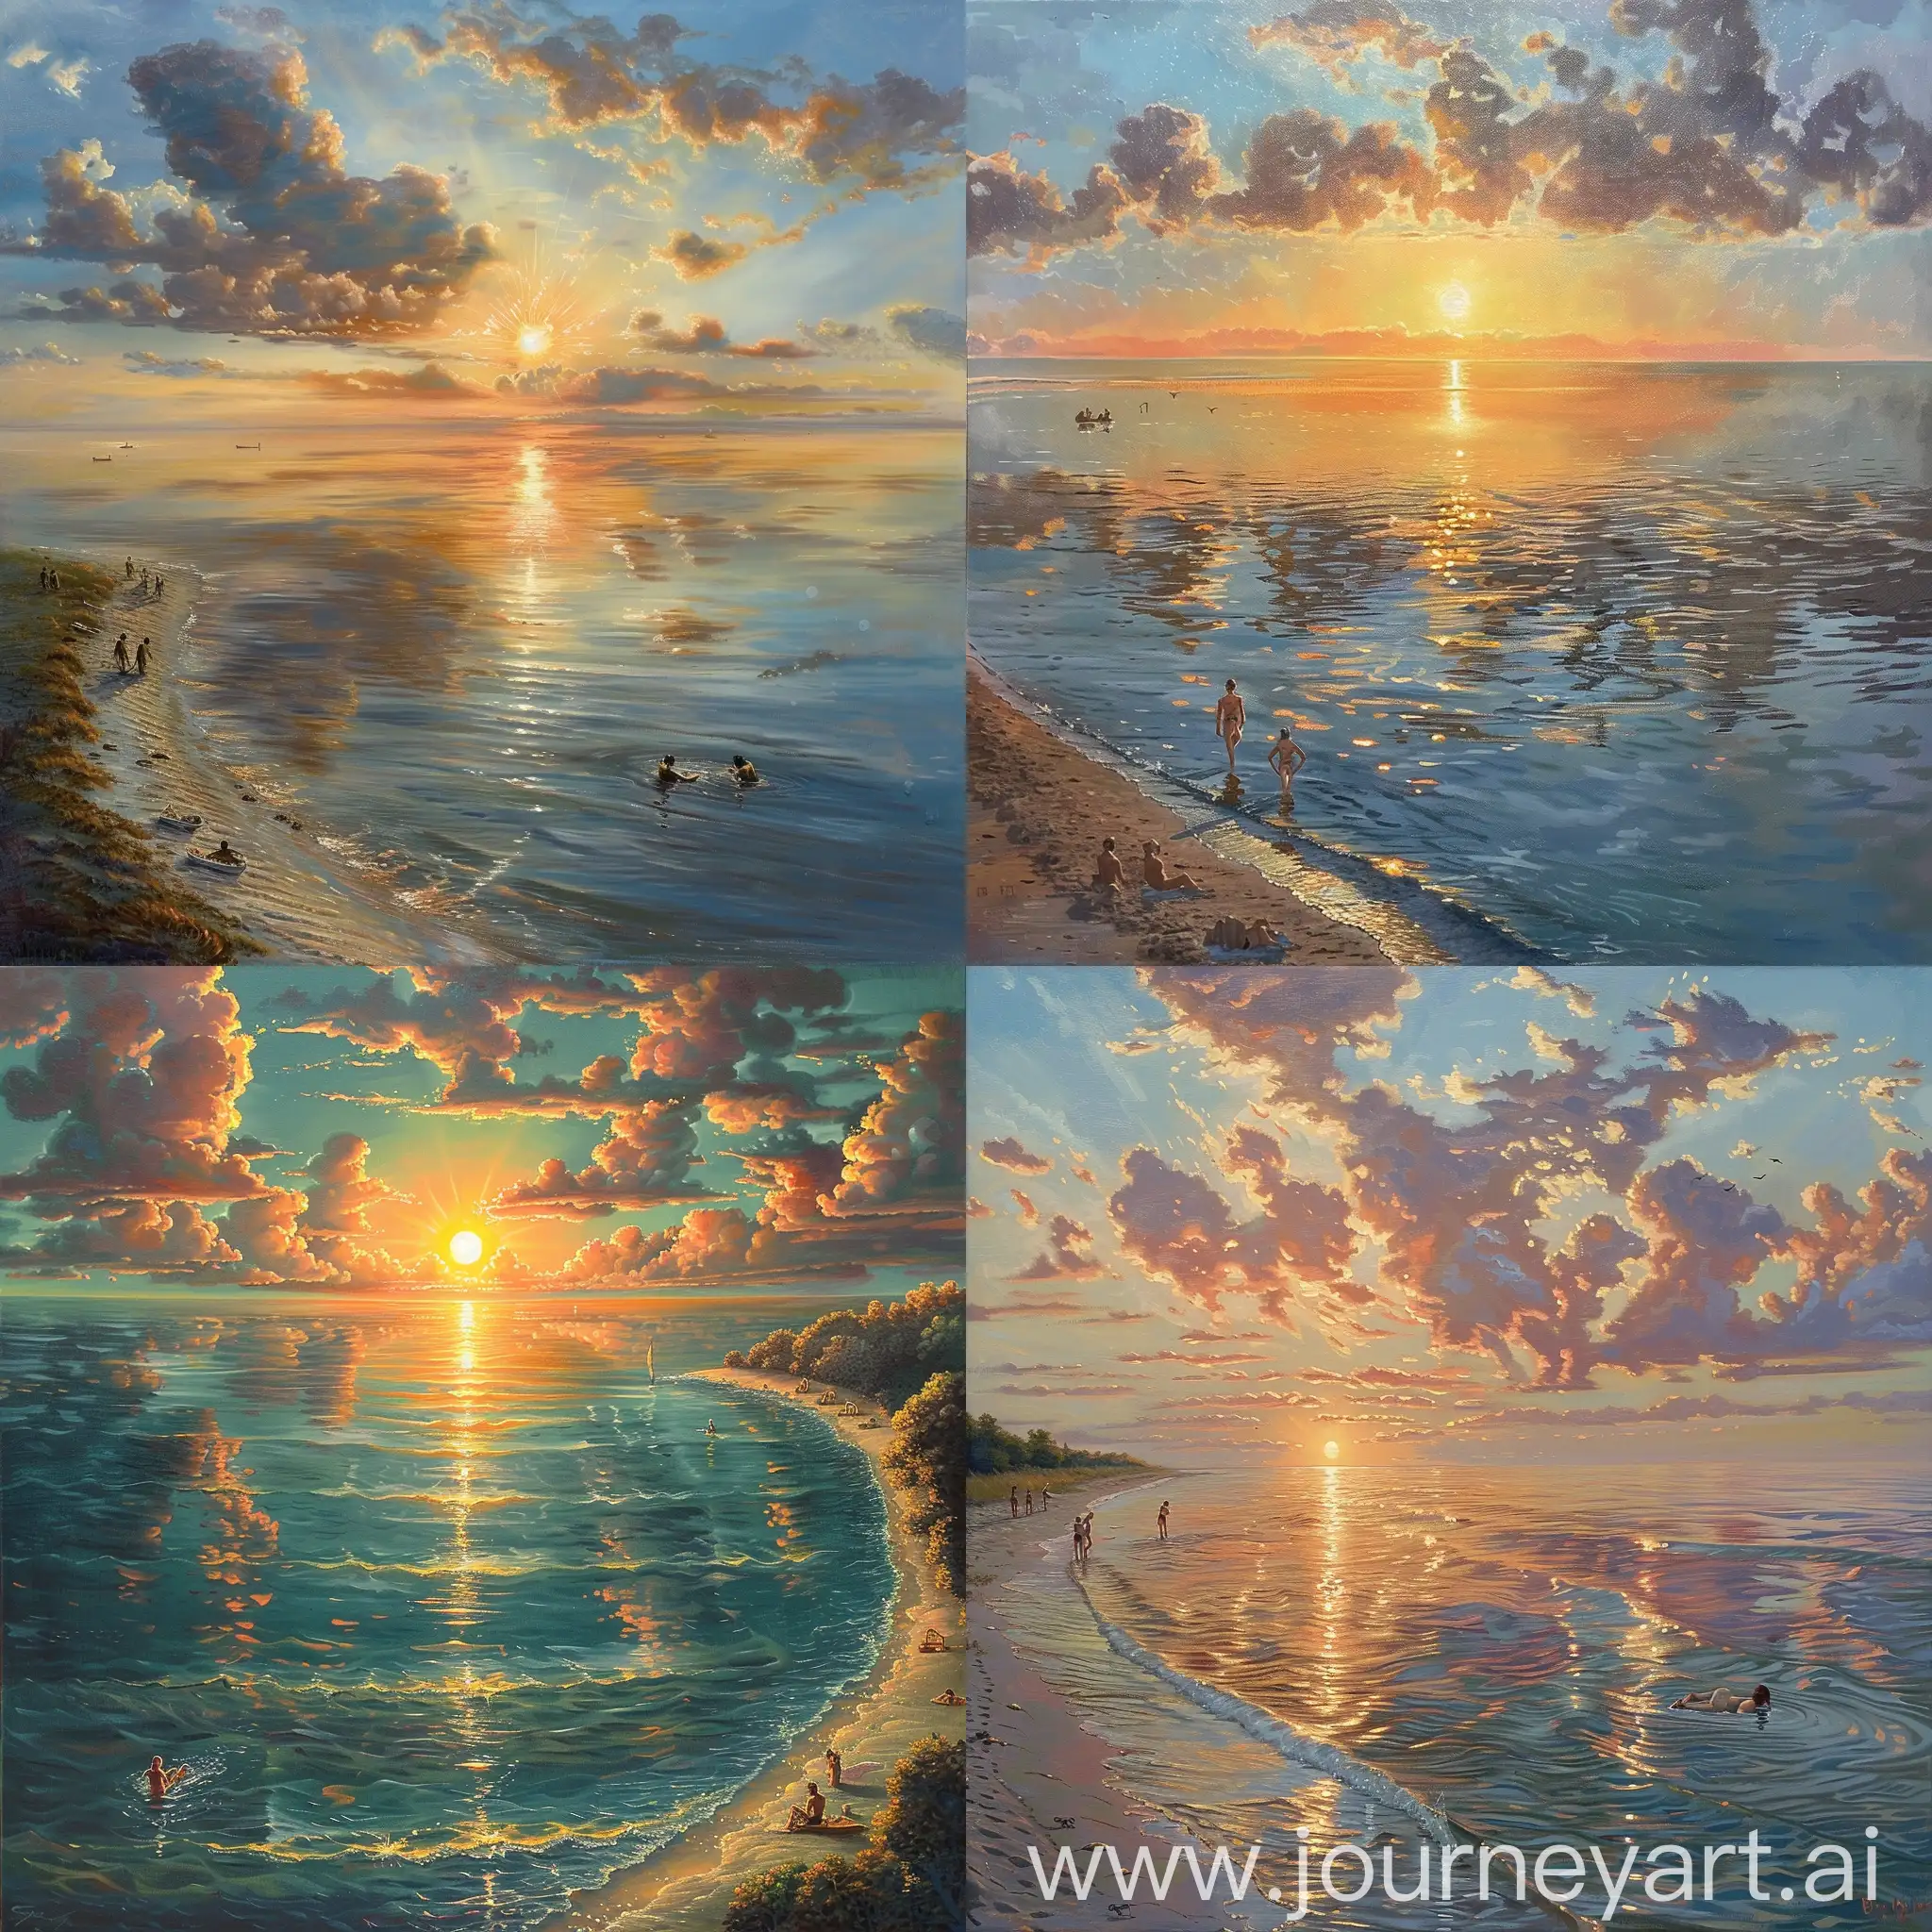 Tranquil-Sunset-Seascape-with-Beachgoers-and-Floating-Figures